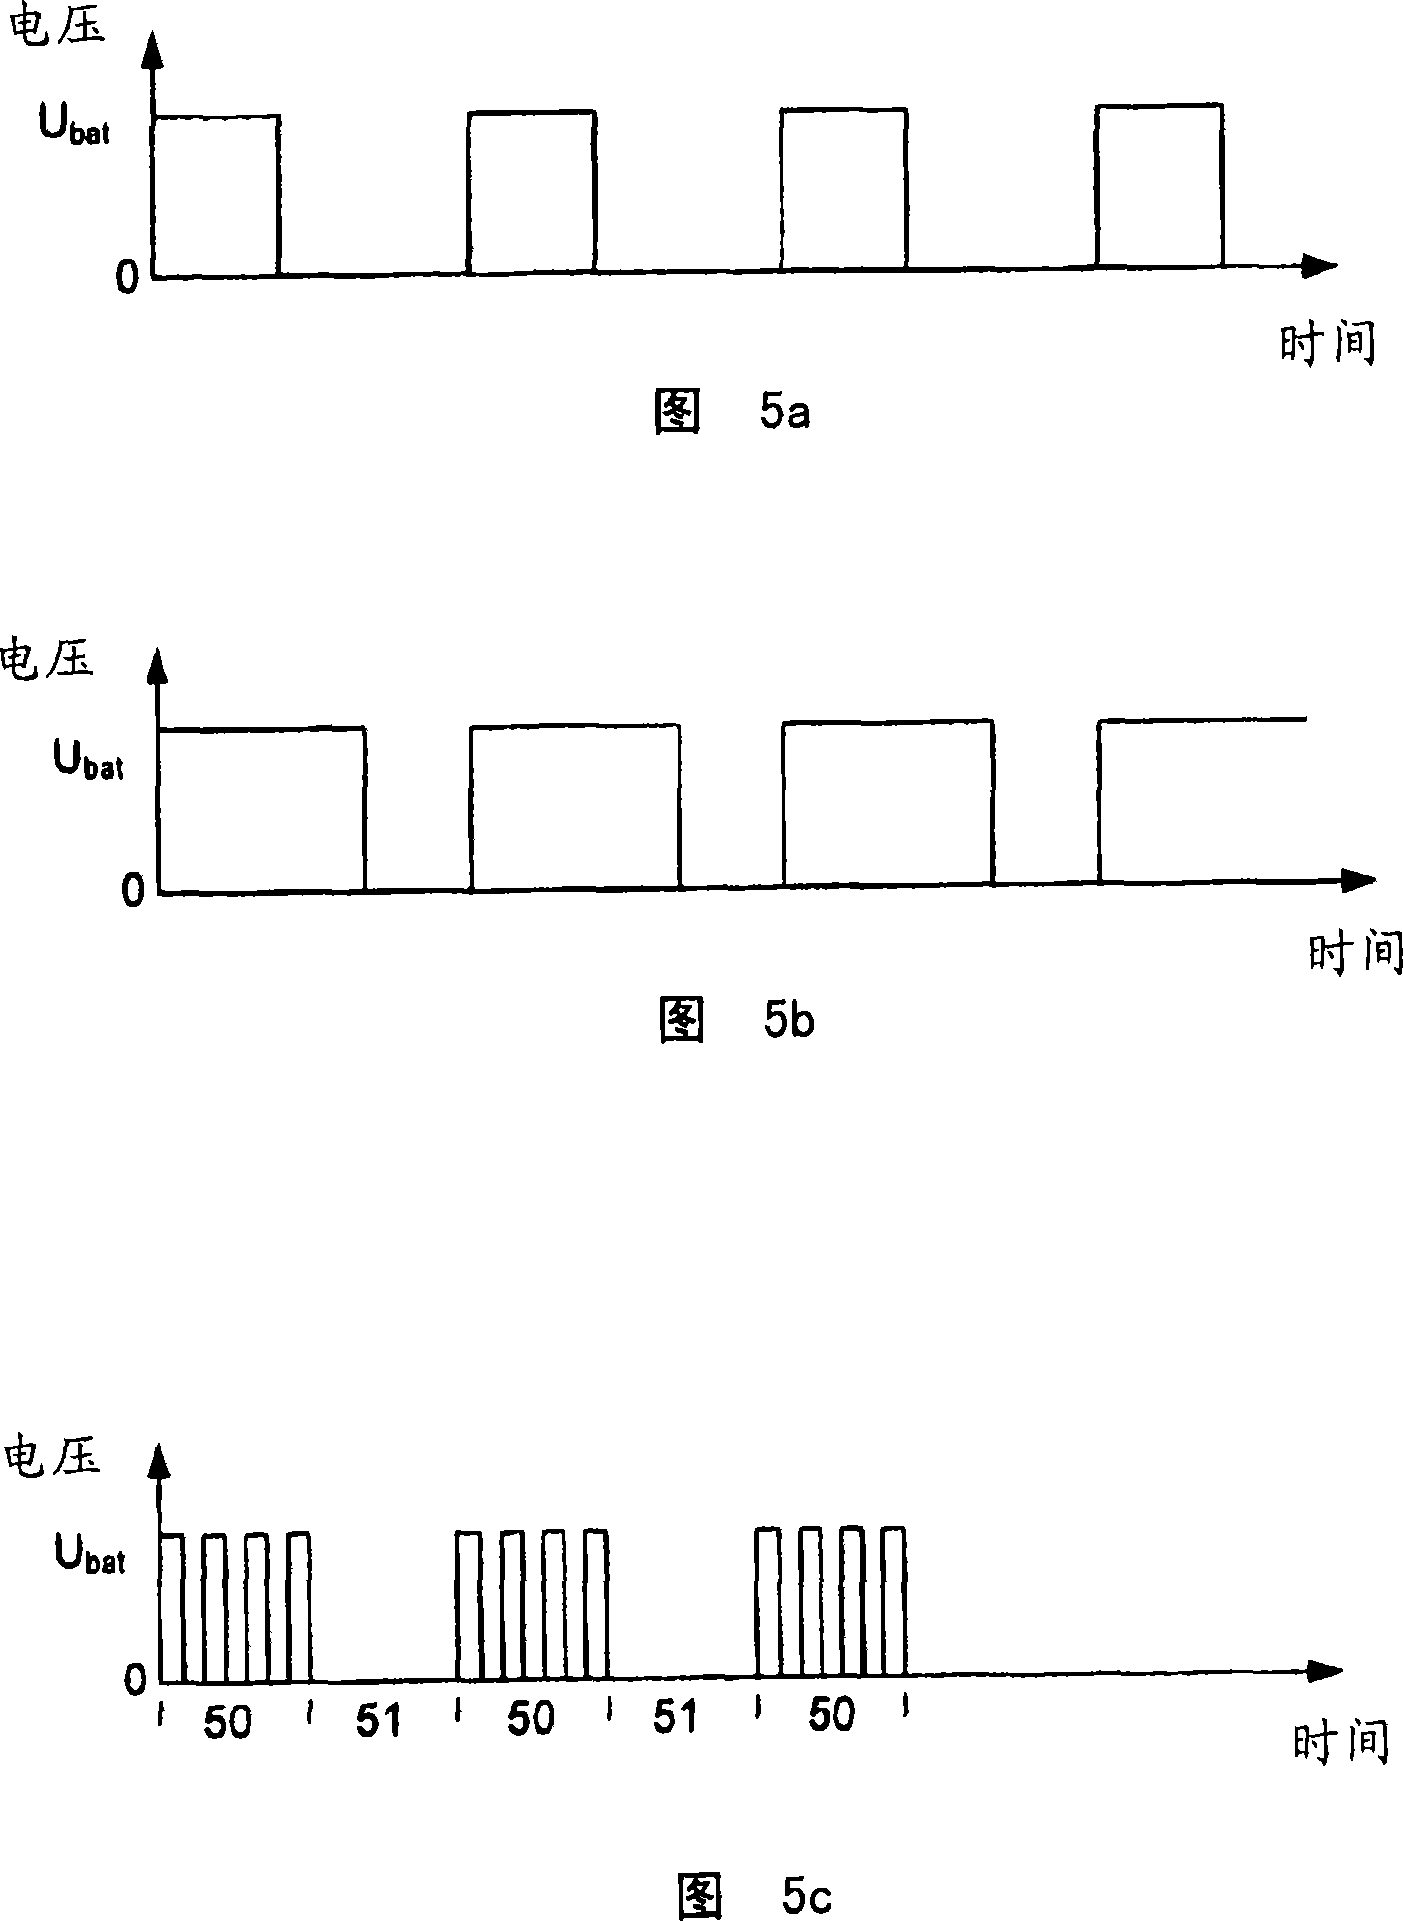 Portable electronic device with operational interface controlled by a proximity sensor